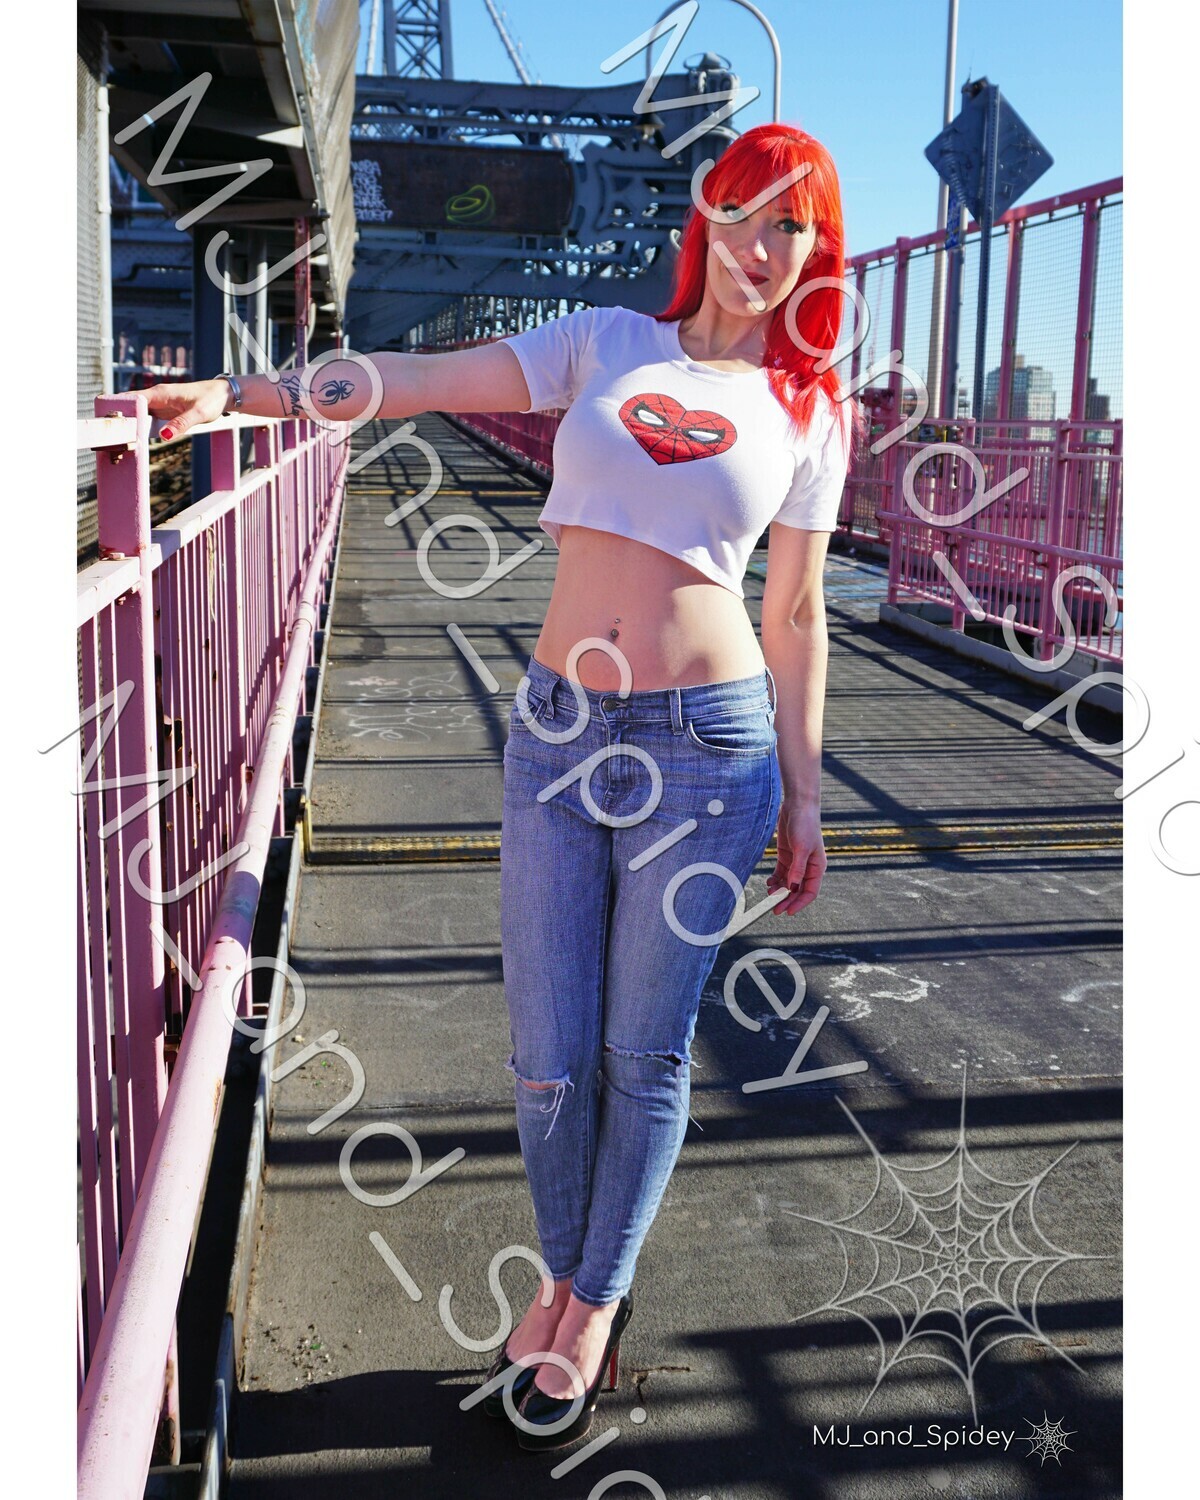 Marvel - Spider-Man - Mary Jane Watson - Classic 0 -  Cosplay Print (@MJ_and_Spidey, MJ and Spidey, Comics)